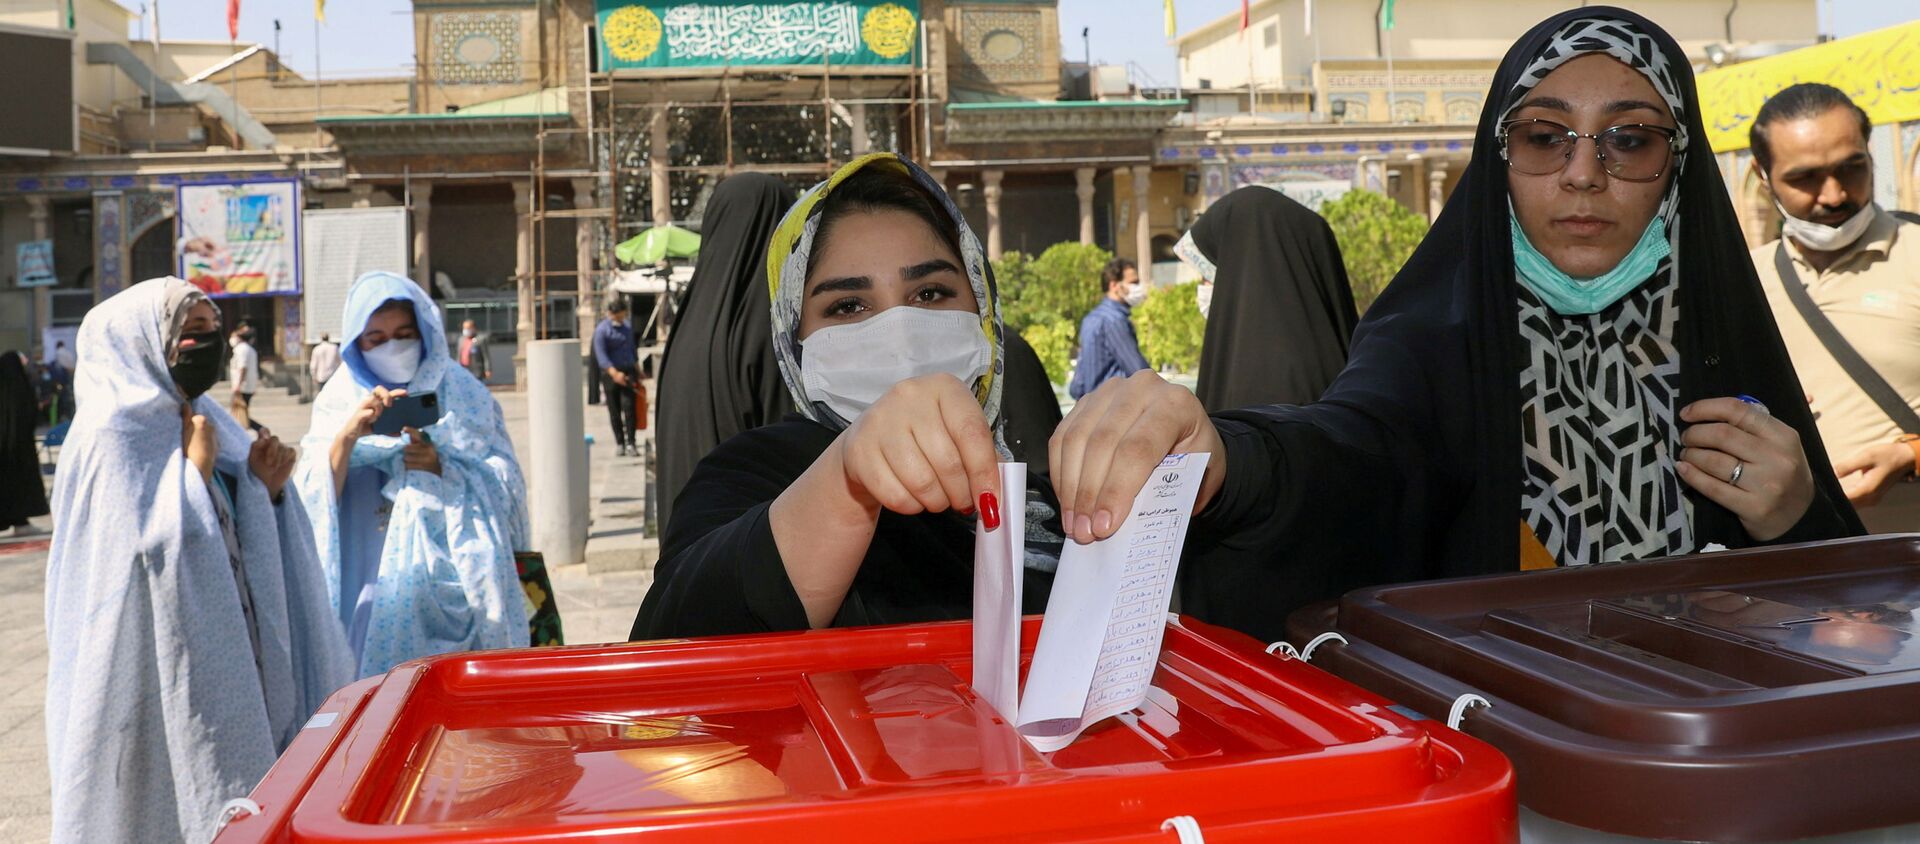 Iranian women cast their vote during presidential elections at a polling station in Tehran, Iran, 18 June 2021 - Sputnik International, 1920, 18.06.2021